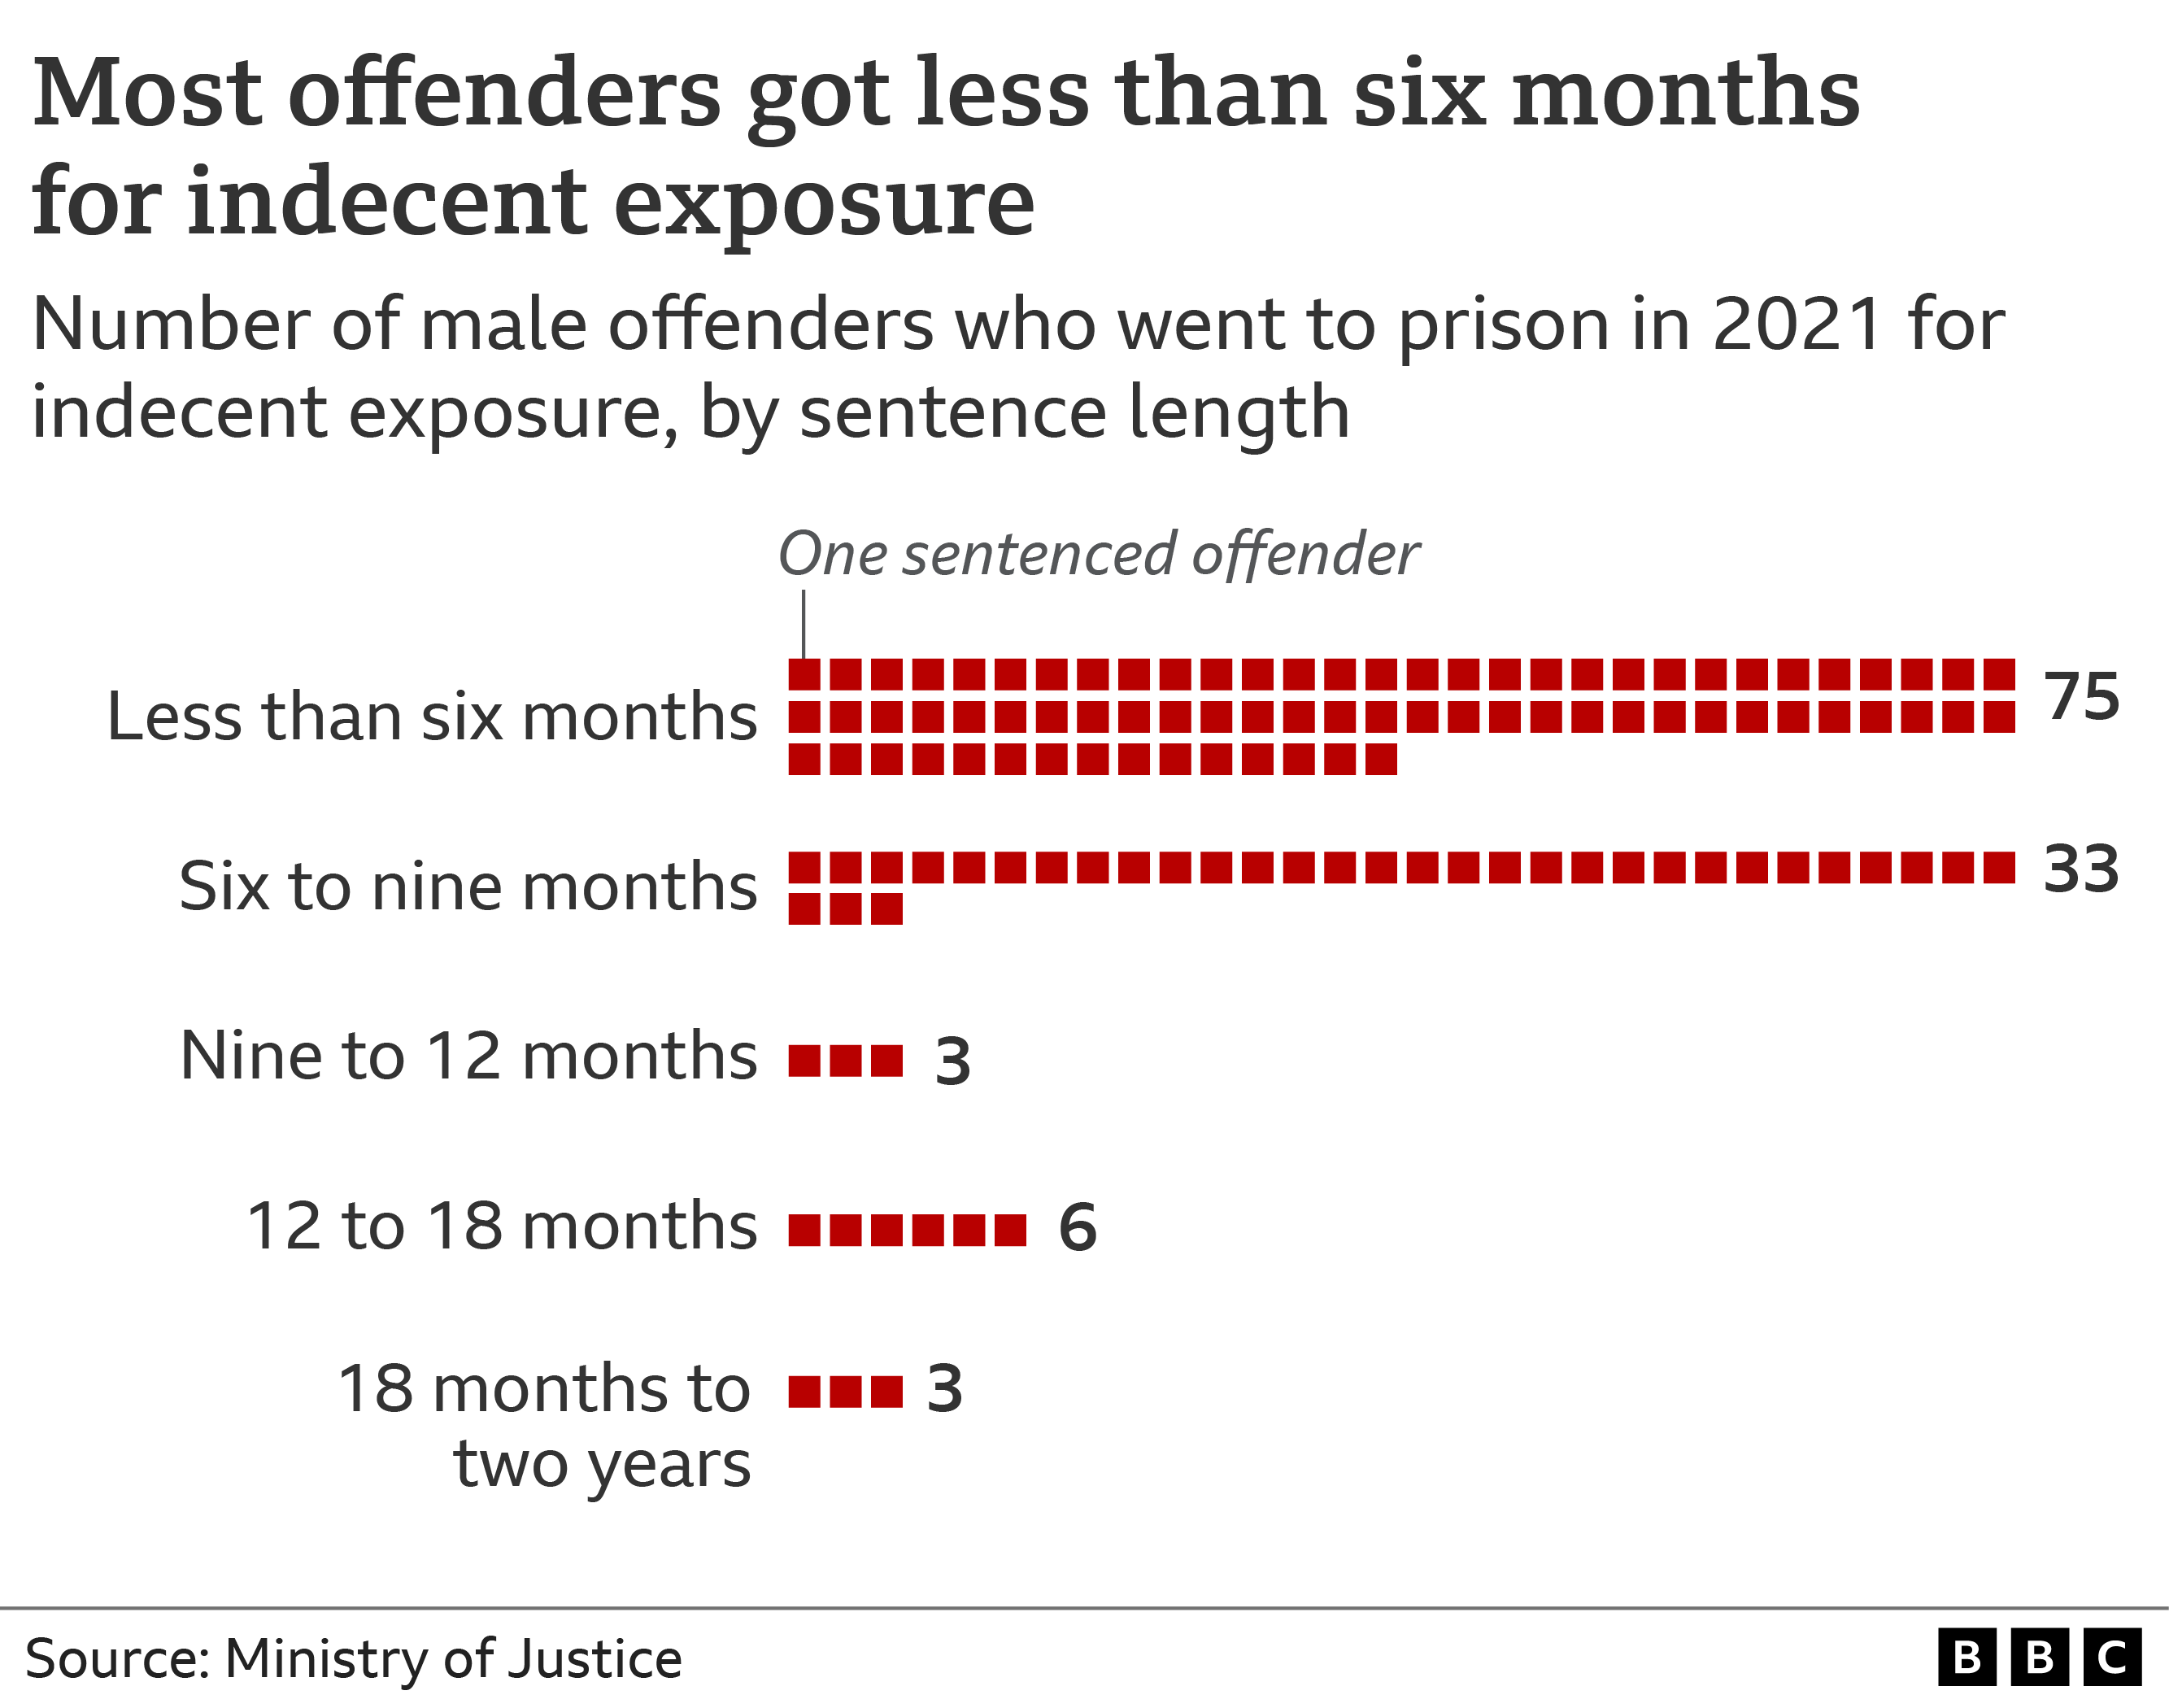 Graphic showing the number of male offenders who went to prison in 2021 for indecent exposure, broken down by sentence length. It shows that most offenders were jailed for less than six months. 75 offenders got less than six months, 33 six to nine months, 3 nine to 12 months, six 12 to 18 months, and three 18 months to two years.